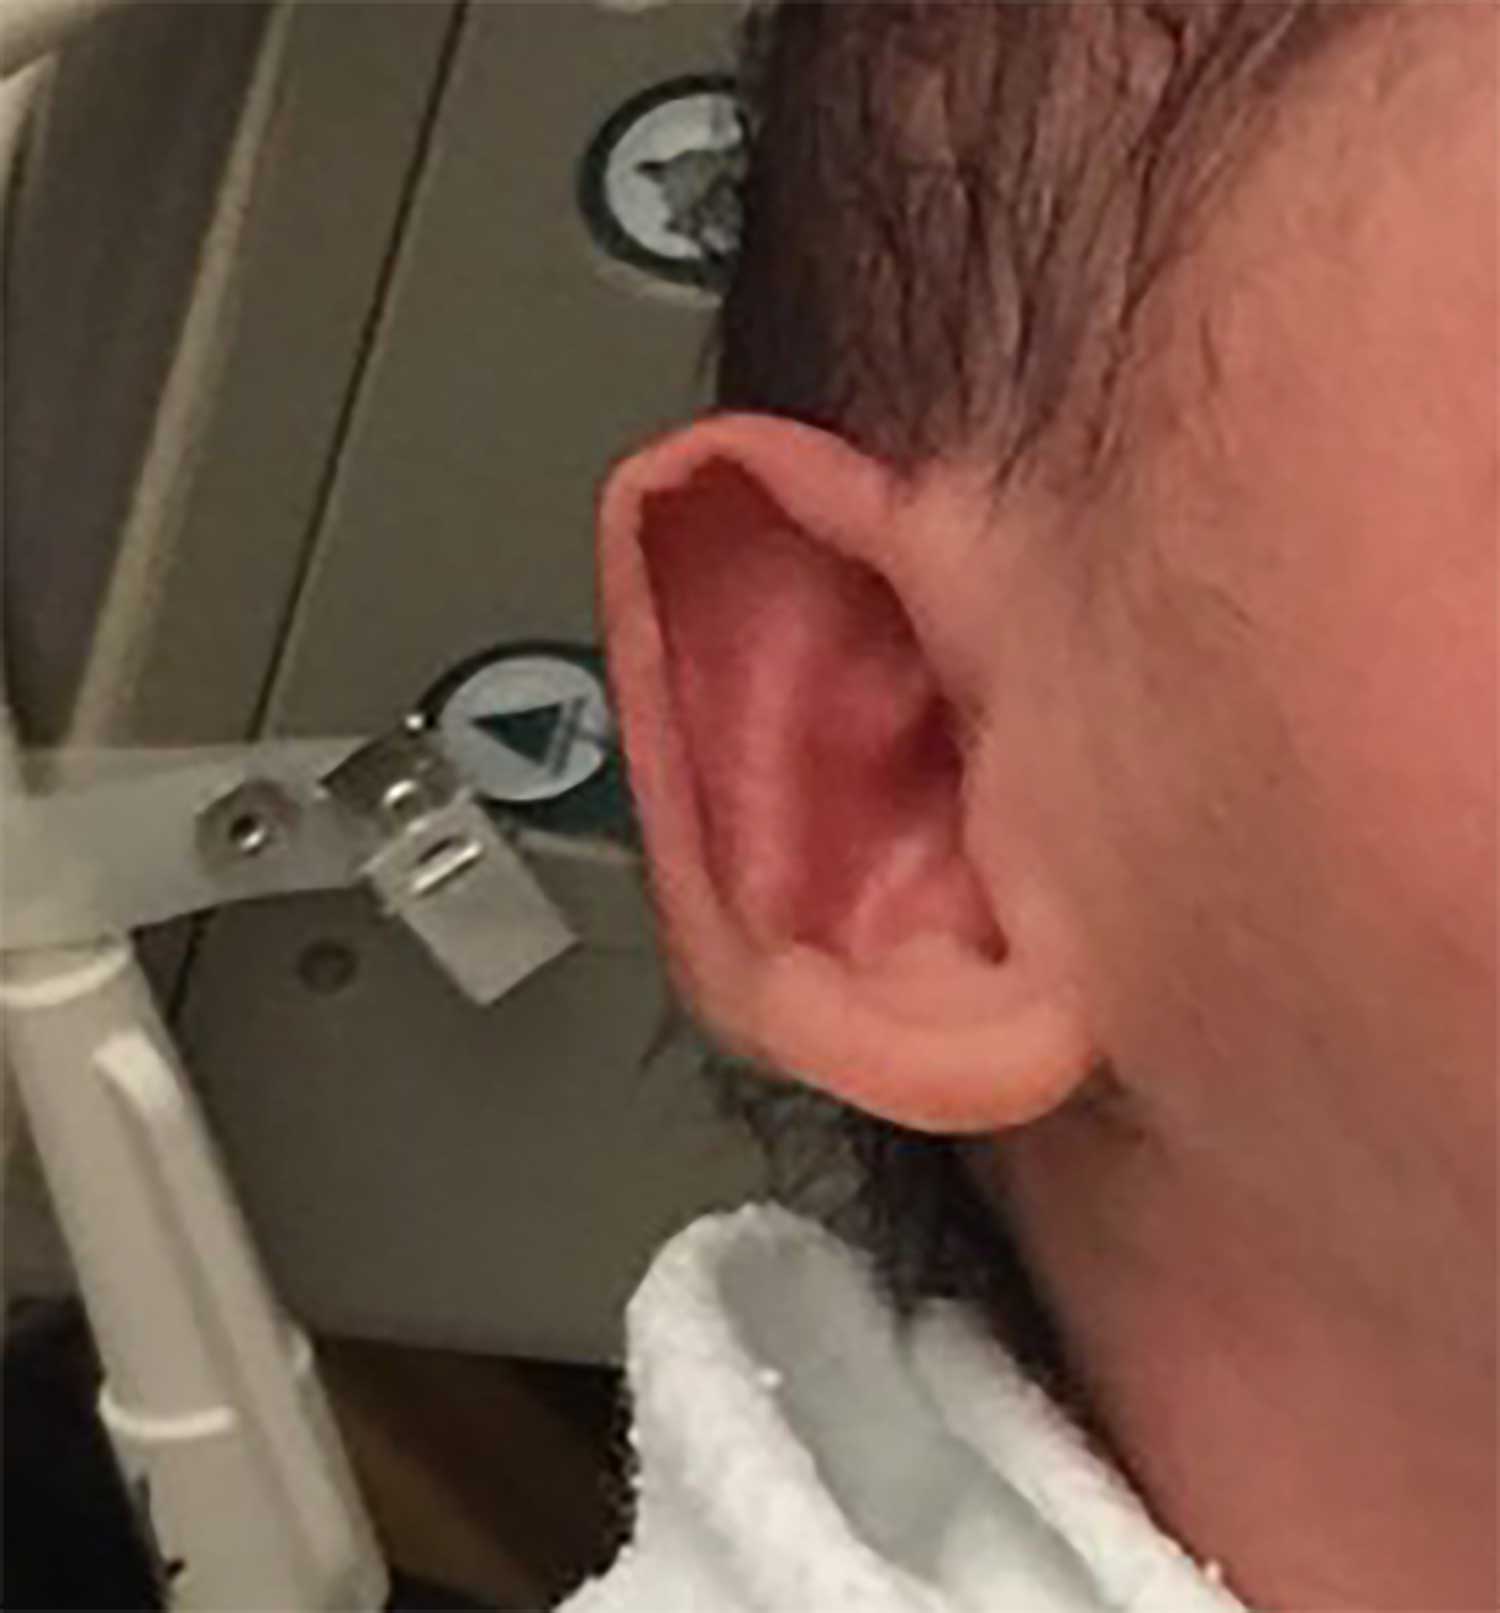 Ear plastic surgery (otoplasty) before photos from Dr Philip Young